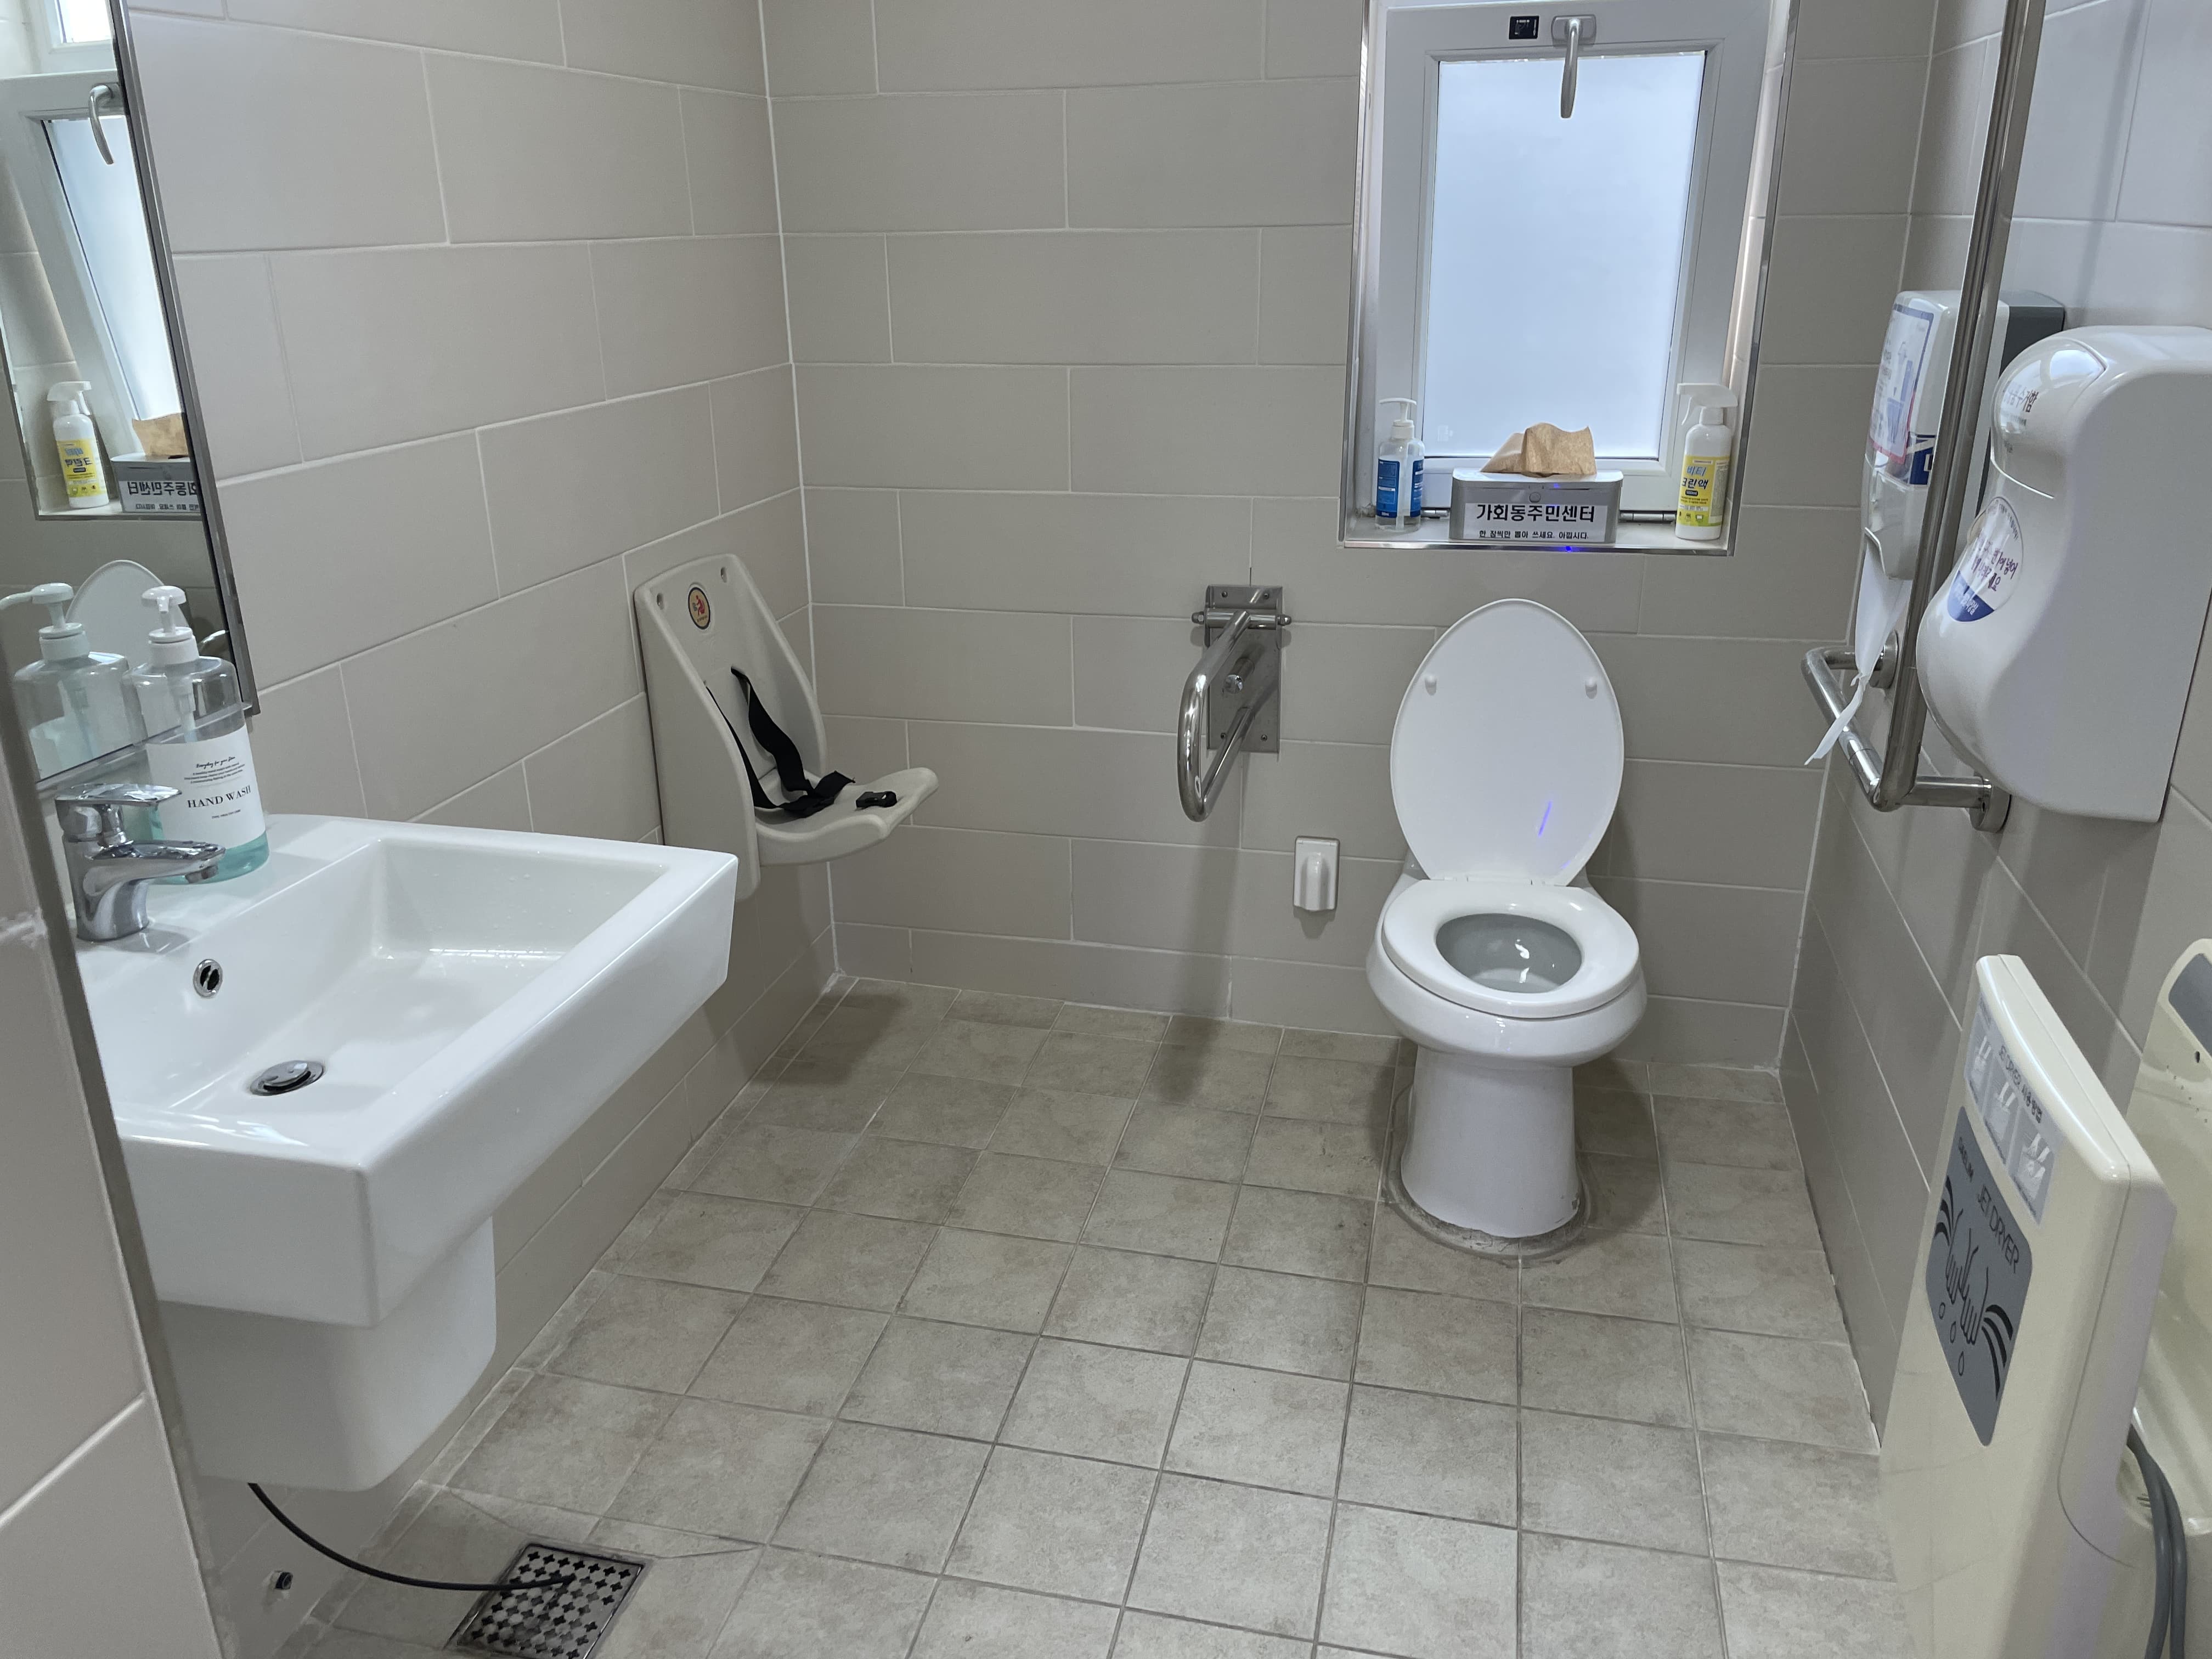 Accessible restroom for persons with disabilities 0 : A single-user accessible restroom with a spacious interior 